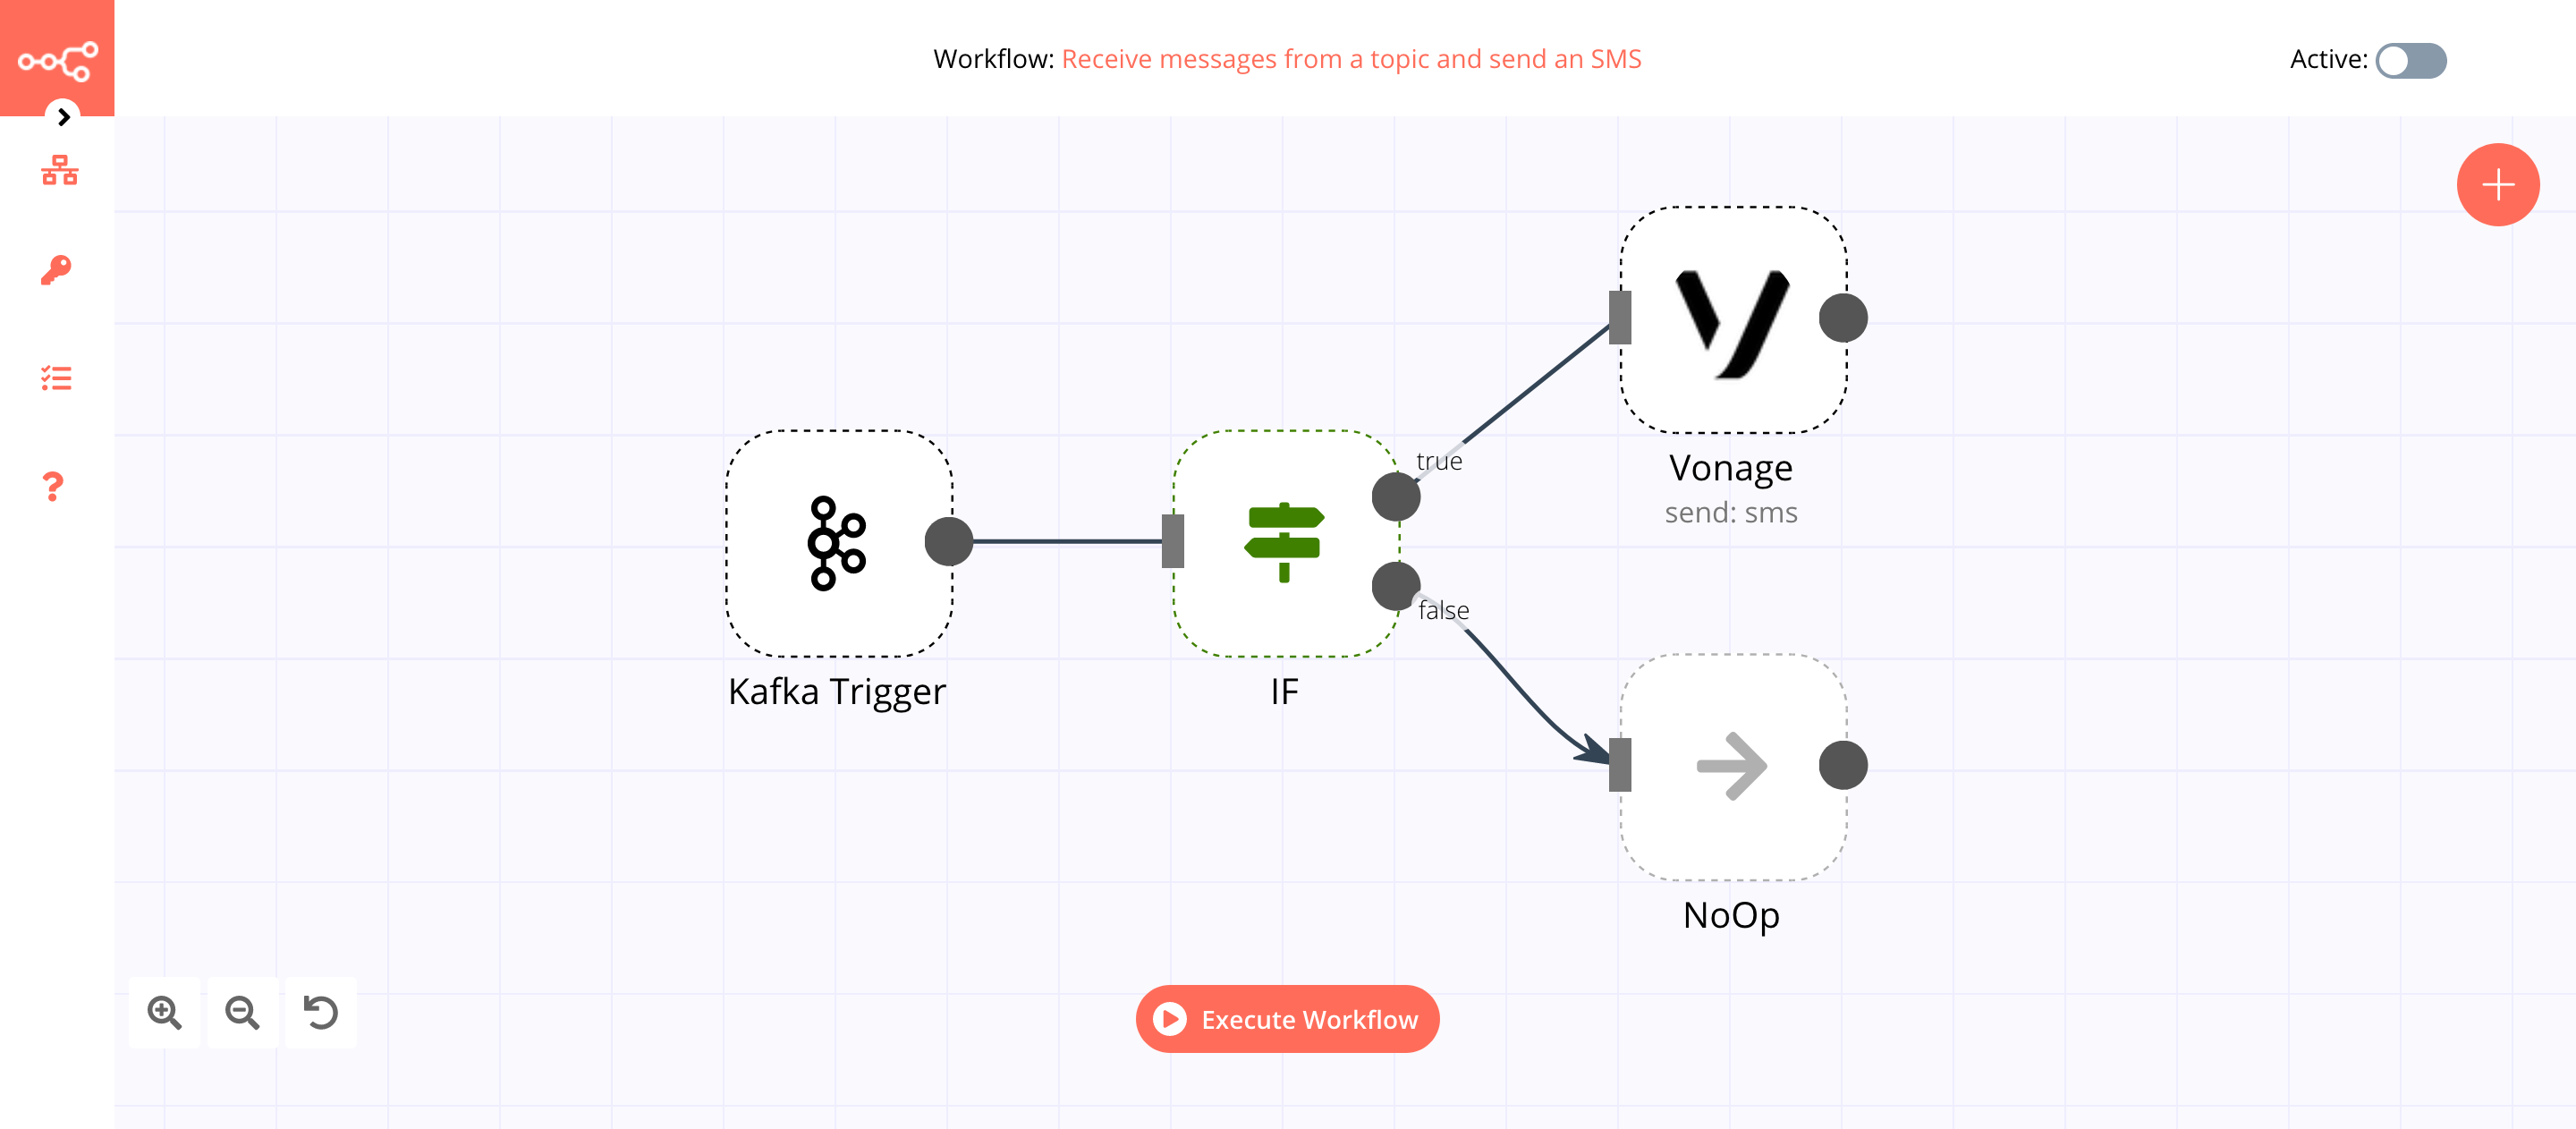 A workflow with the Kafka Trigger node